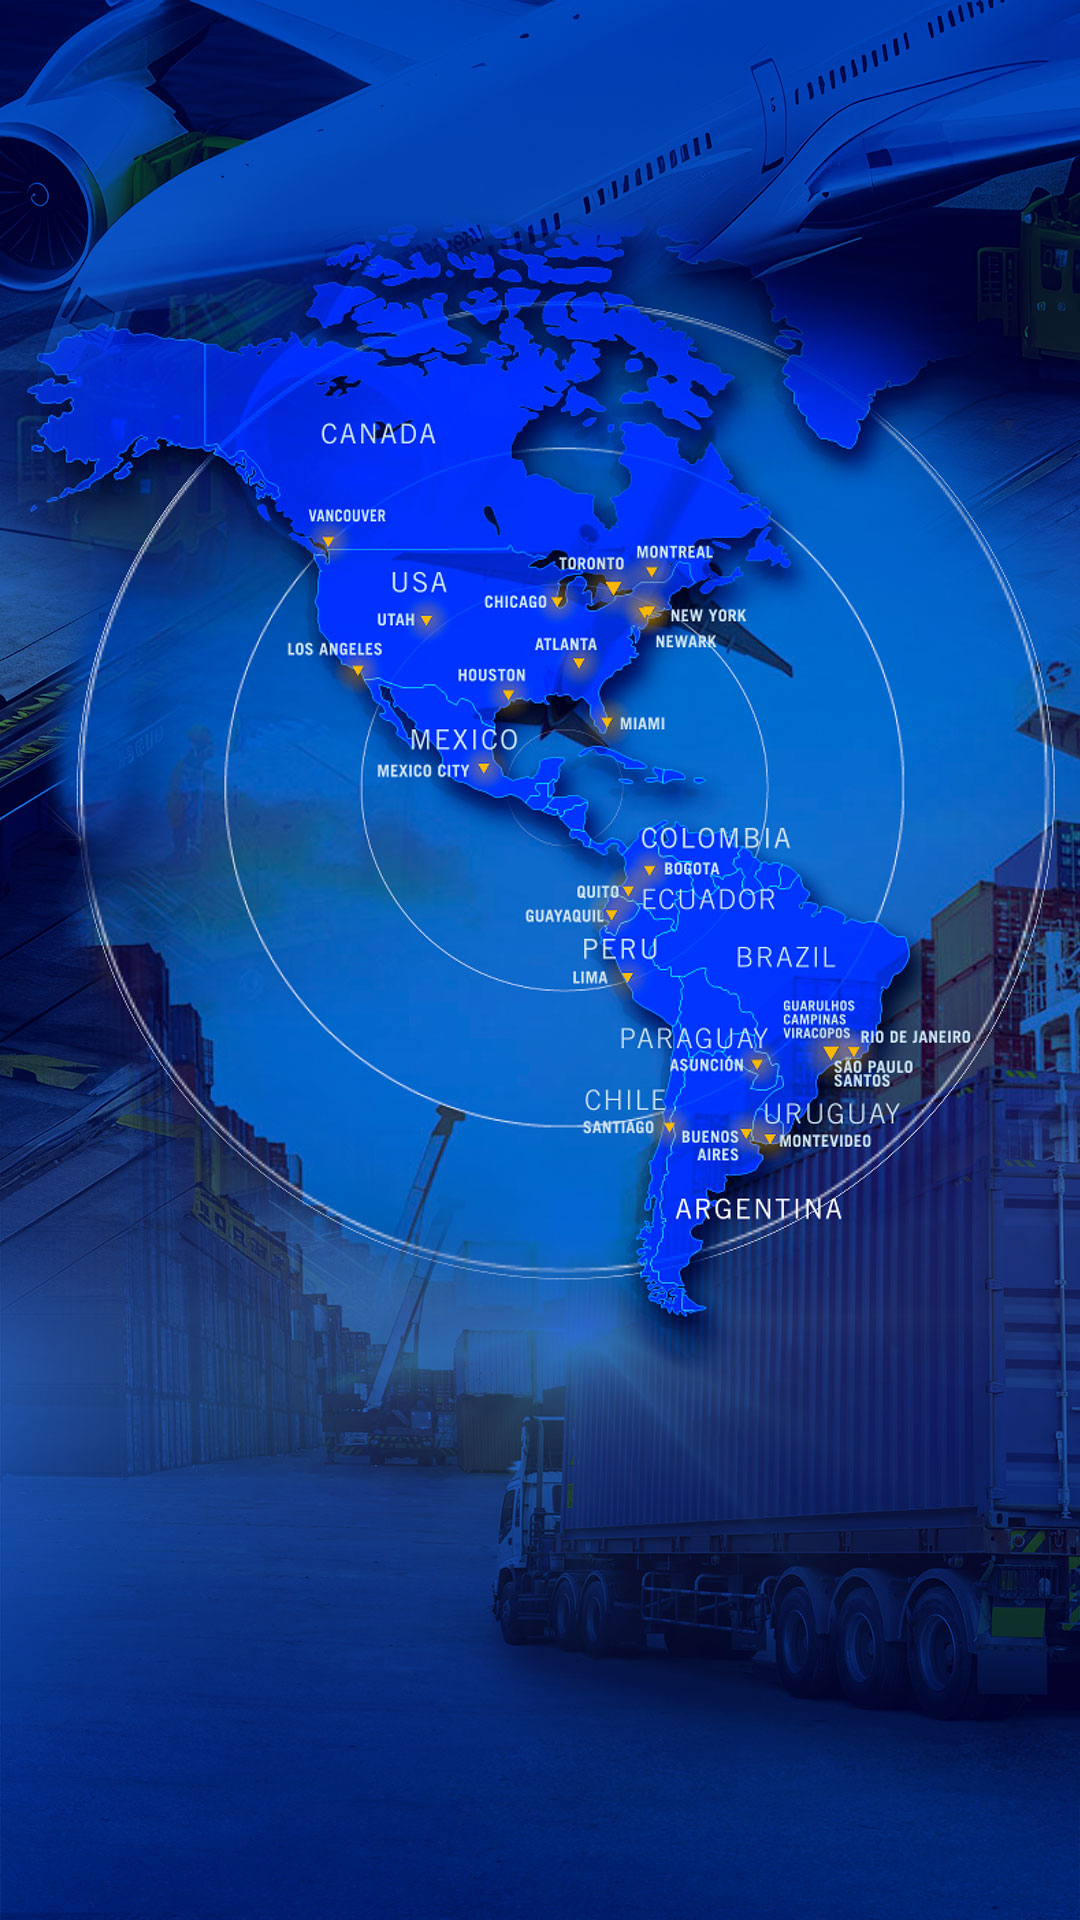 LATAM Cargo establishes support plan to maintain supply of